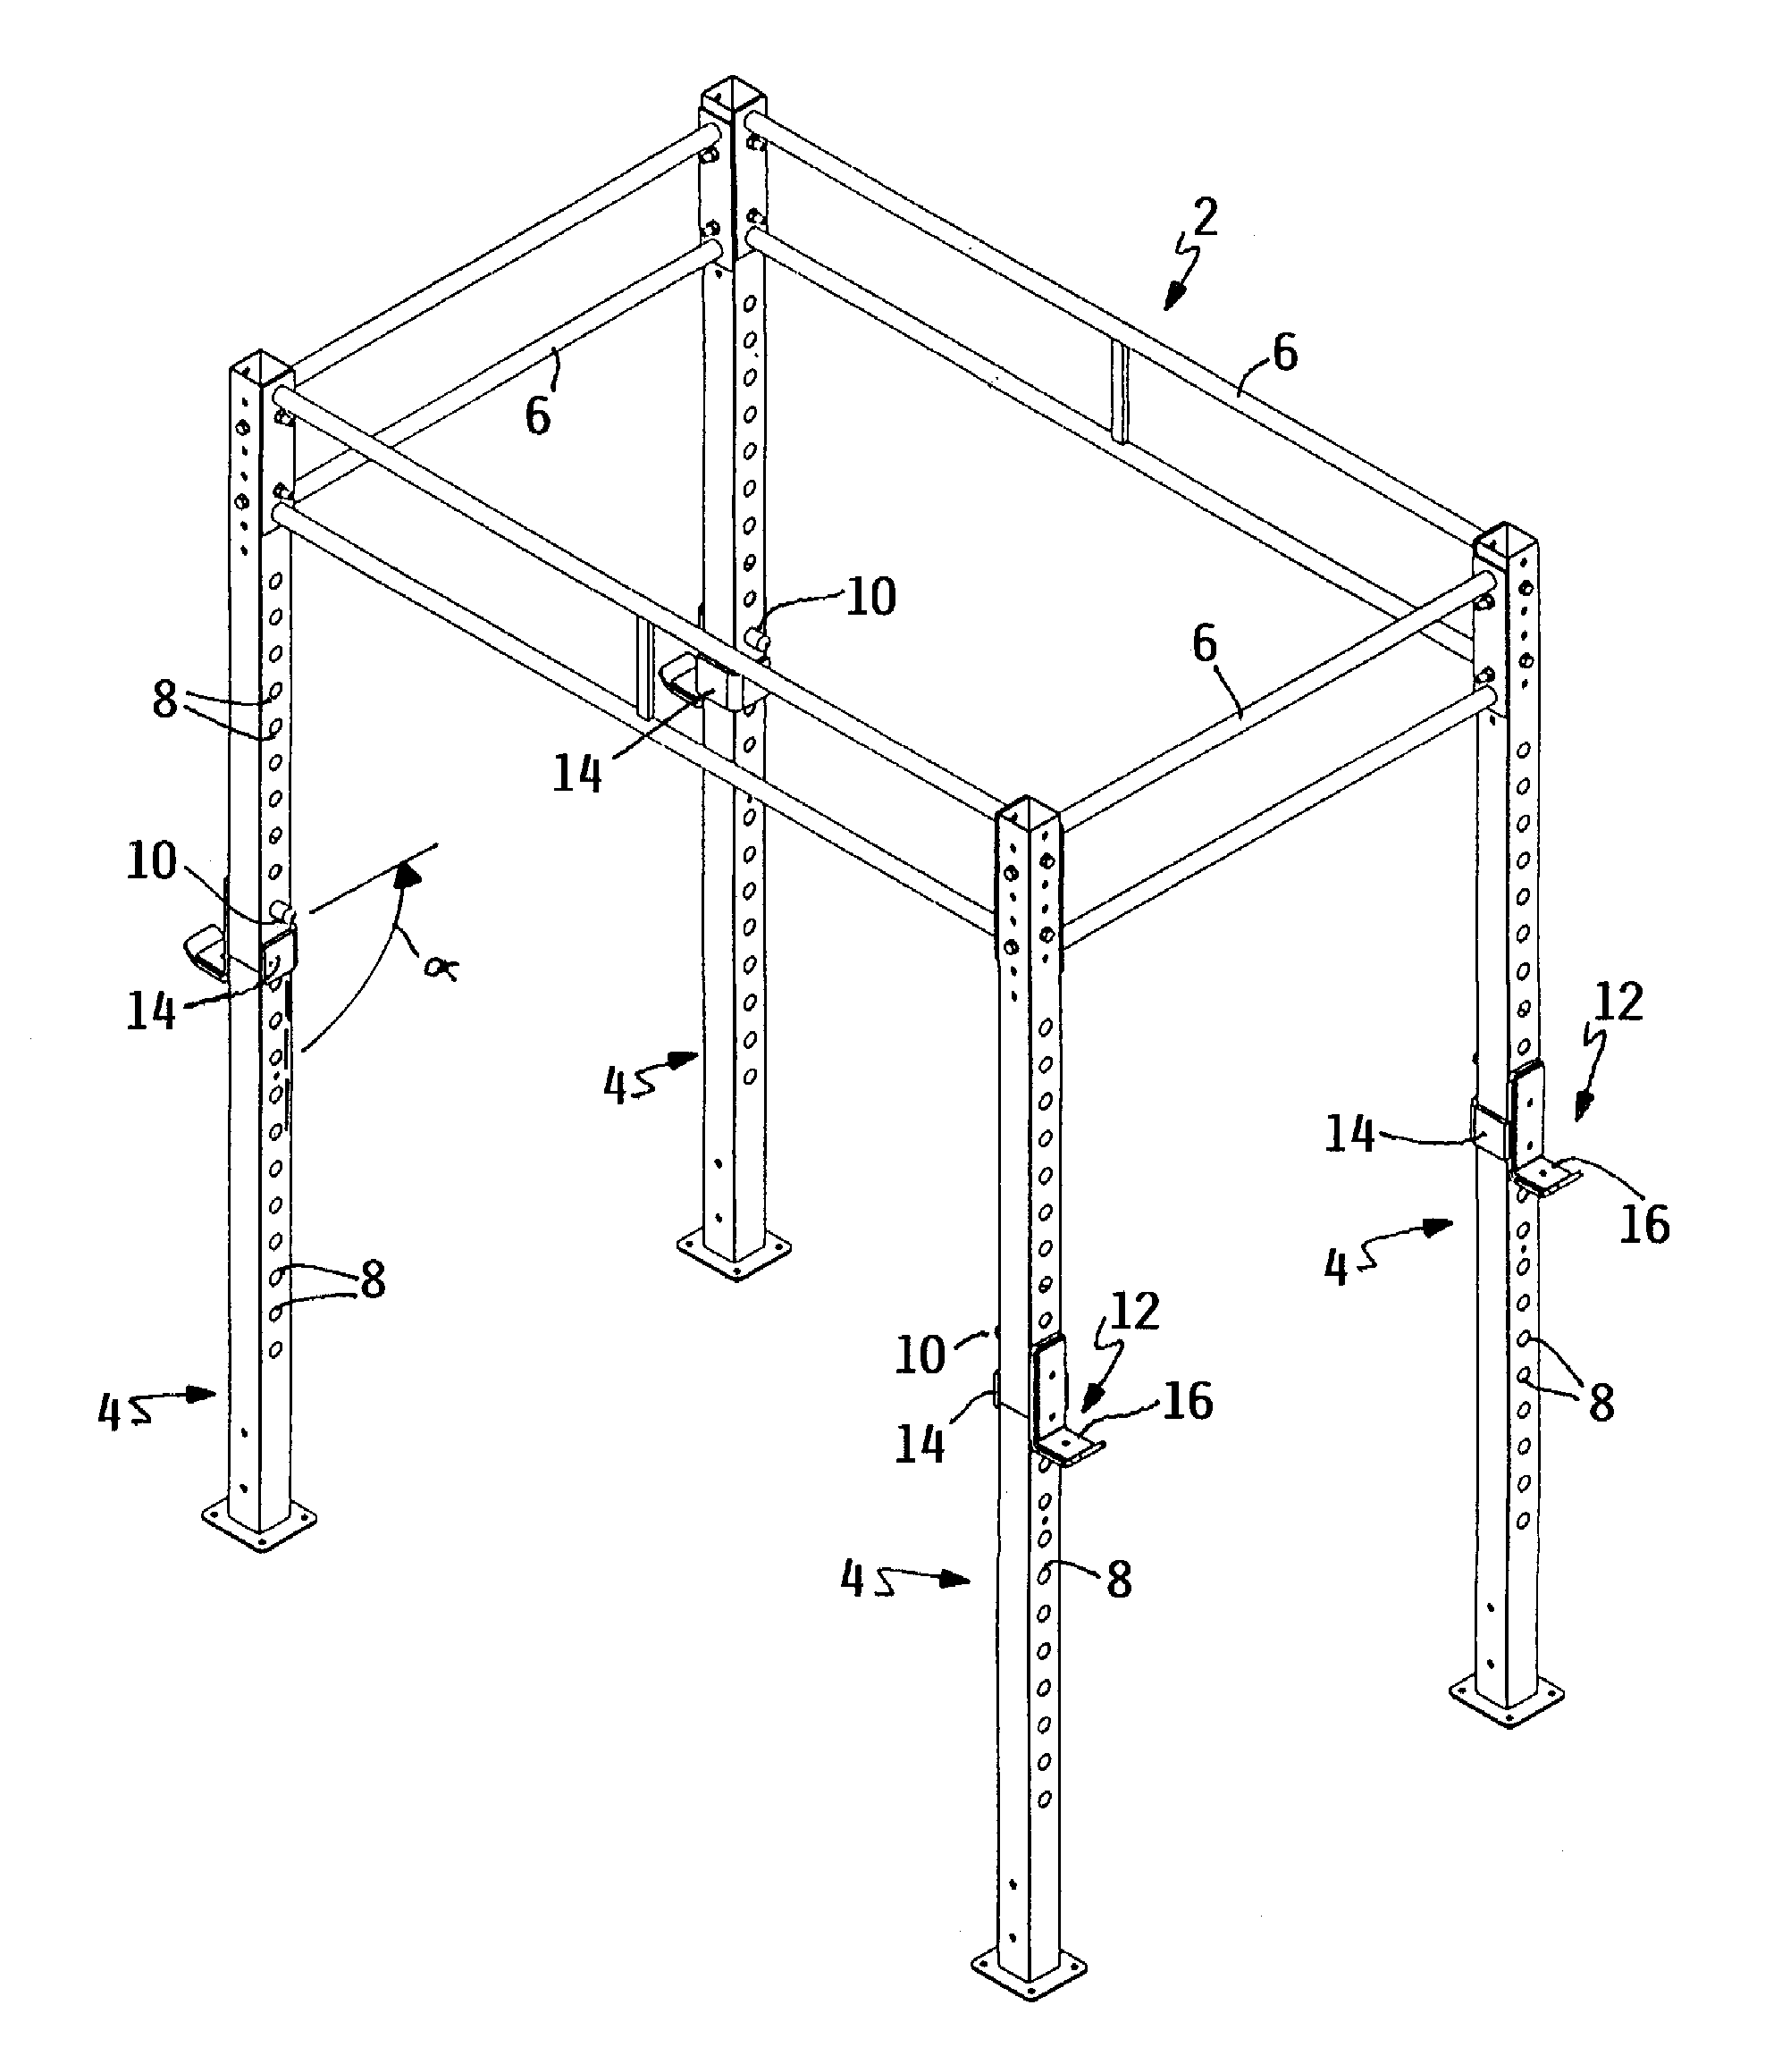 Exercise equipment frame having sectional structural members